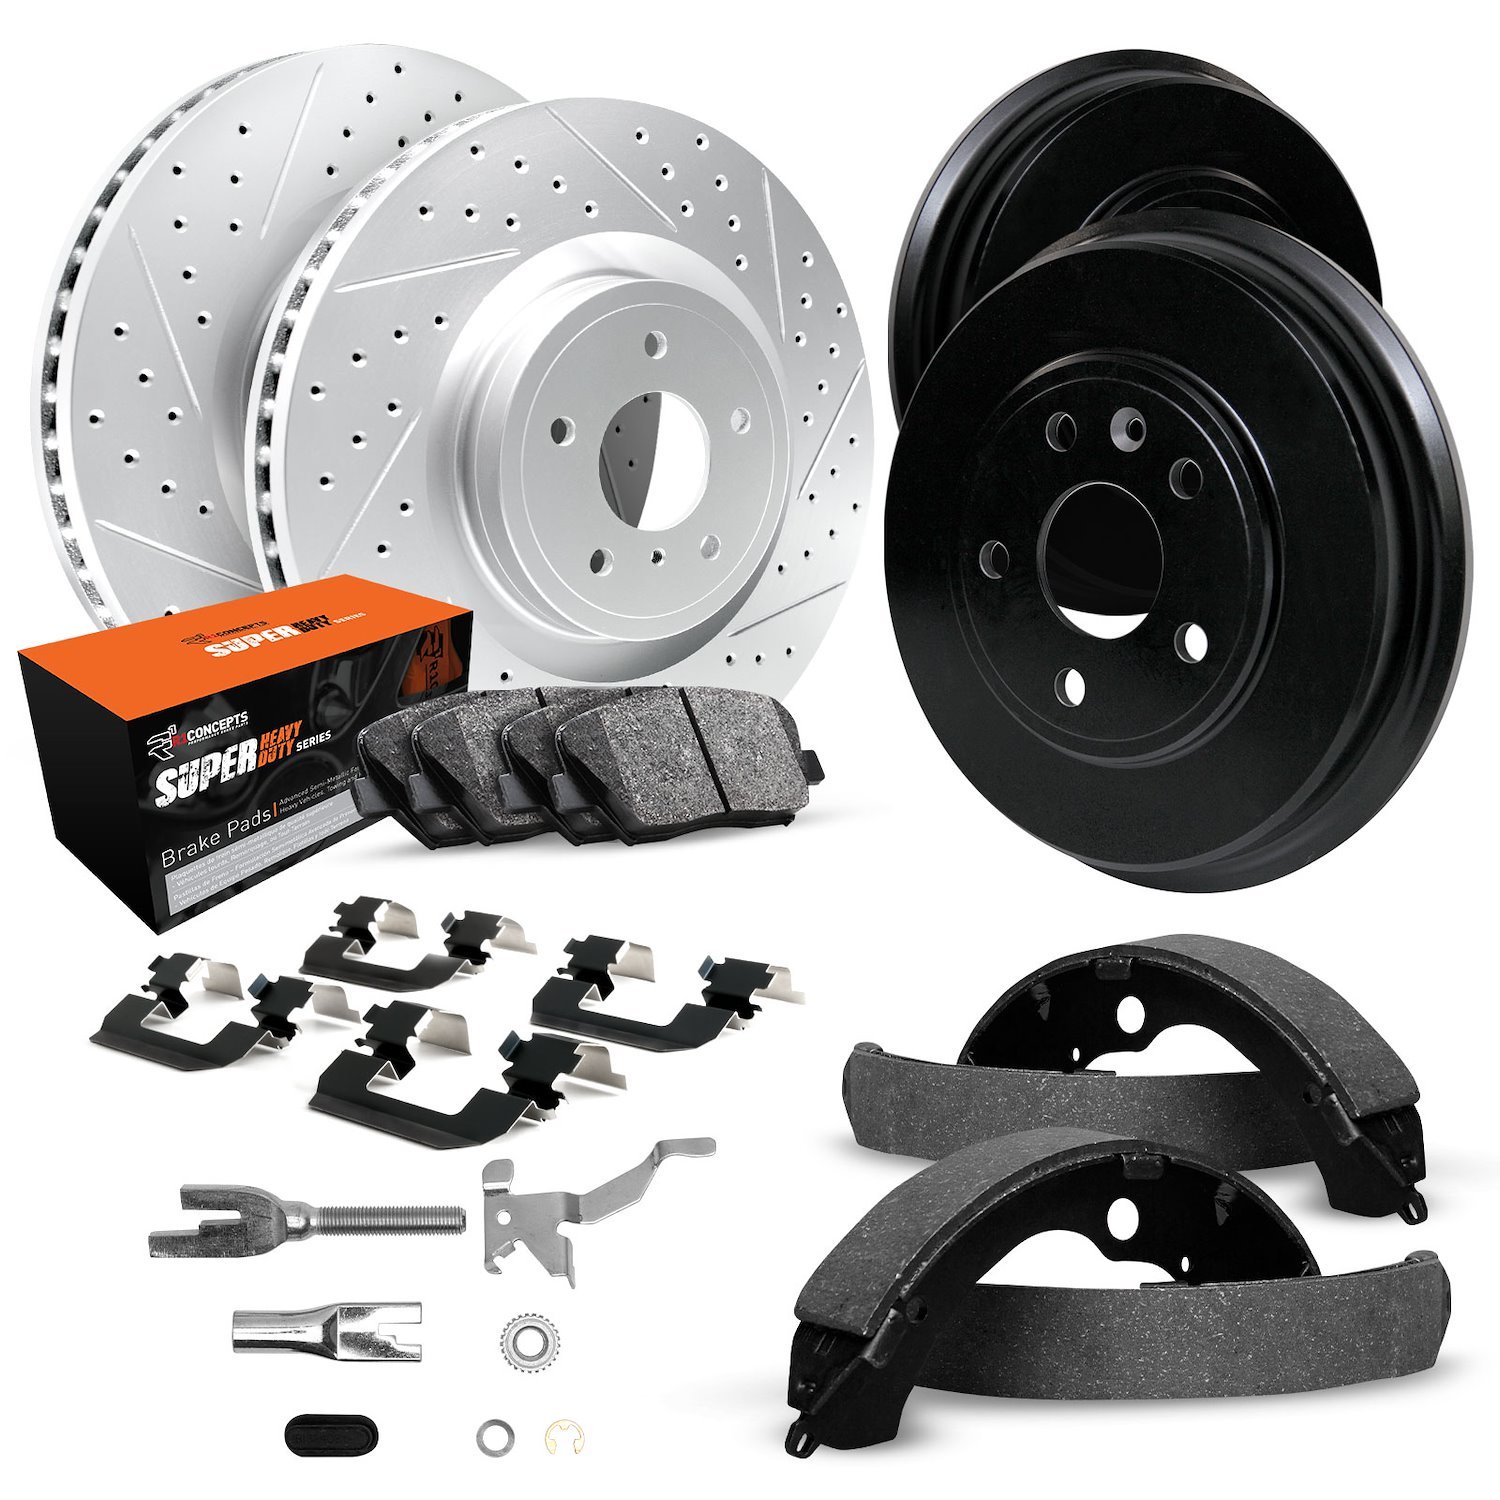 GEO-Carbon Drilled/Slotted Rotors/Drums w/Super-Duty Pads/Shoes/Hardware/Adjusters, 1975-1996 GM, Position: Front/Rear